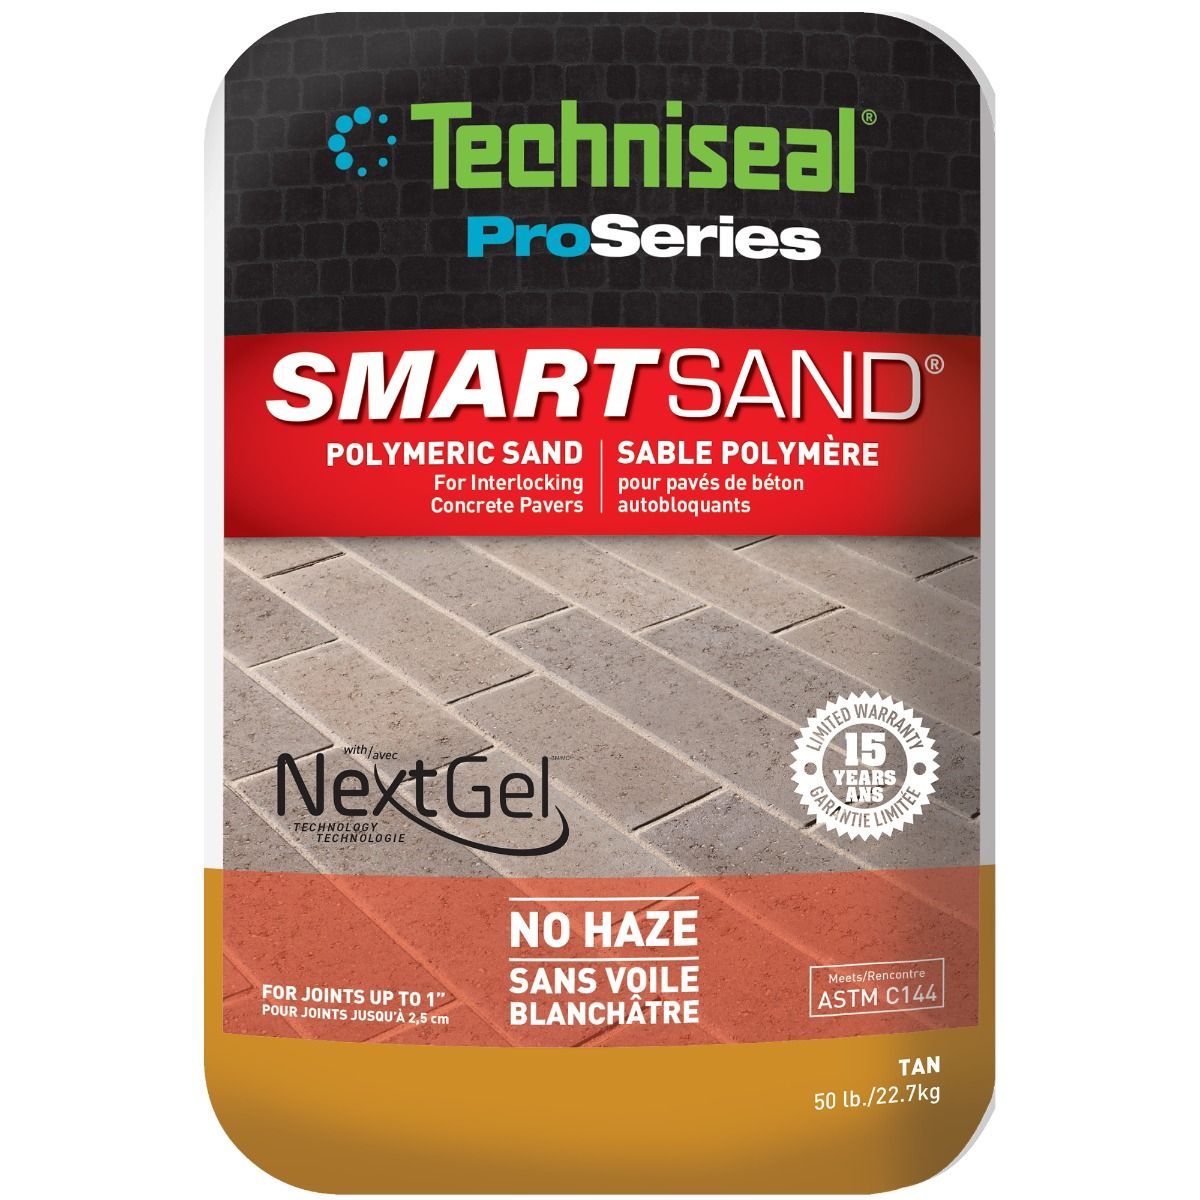 Image Techniseal Smartsand Polymeric Sand in Tan colour - 22.7 kg